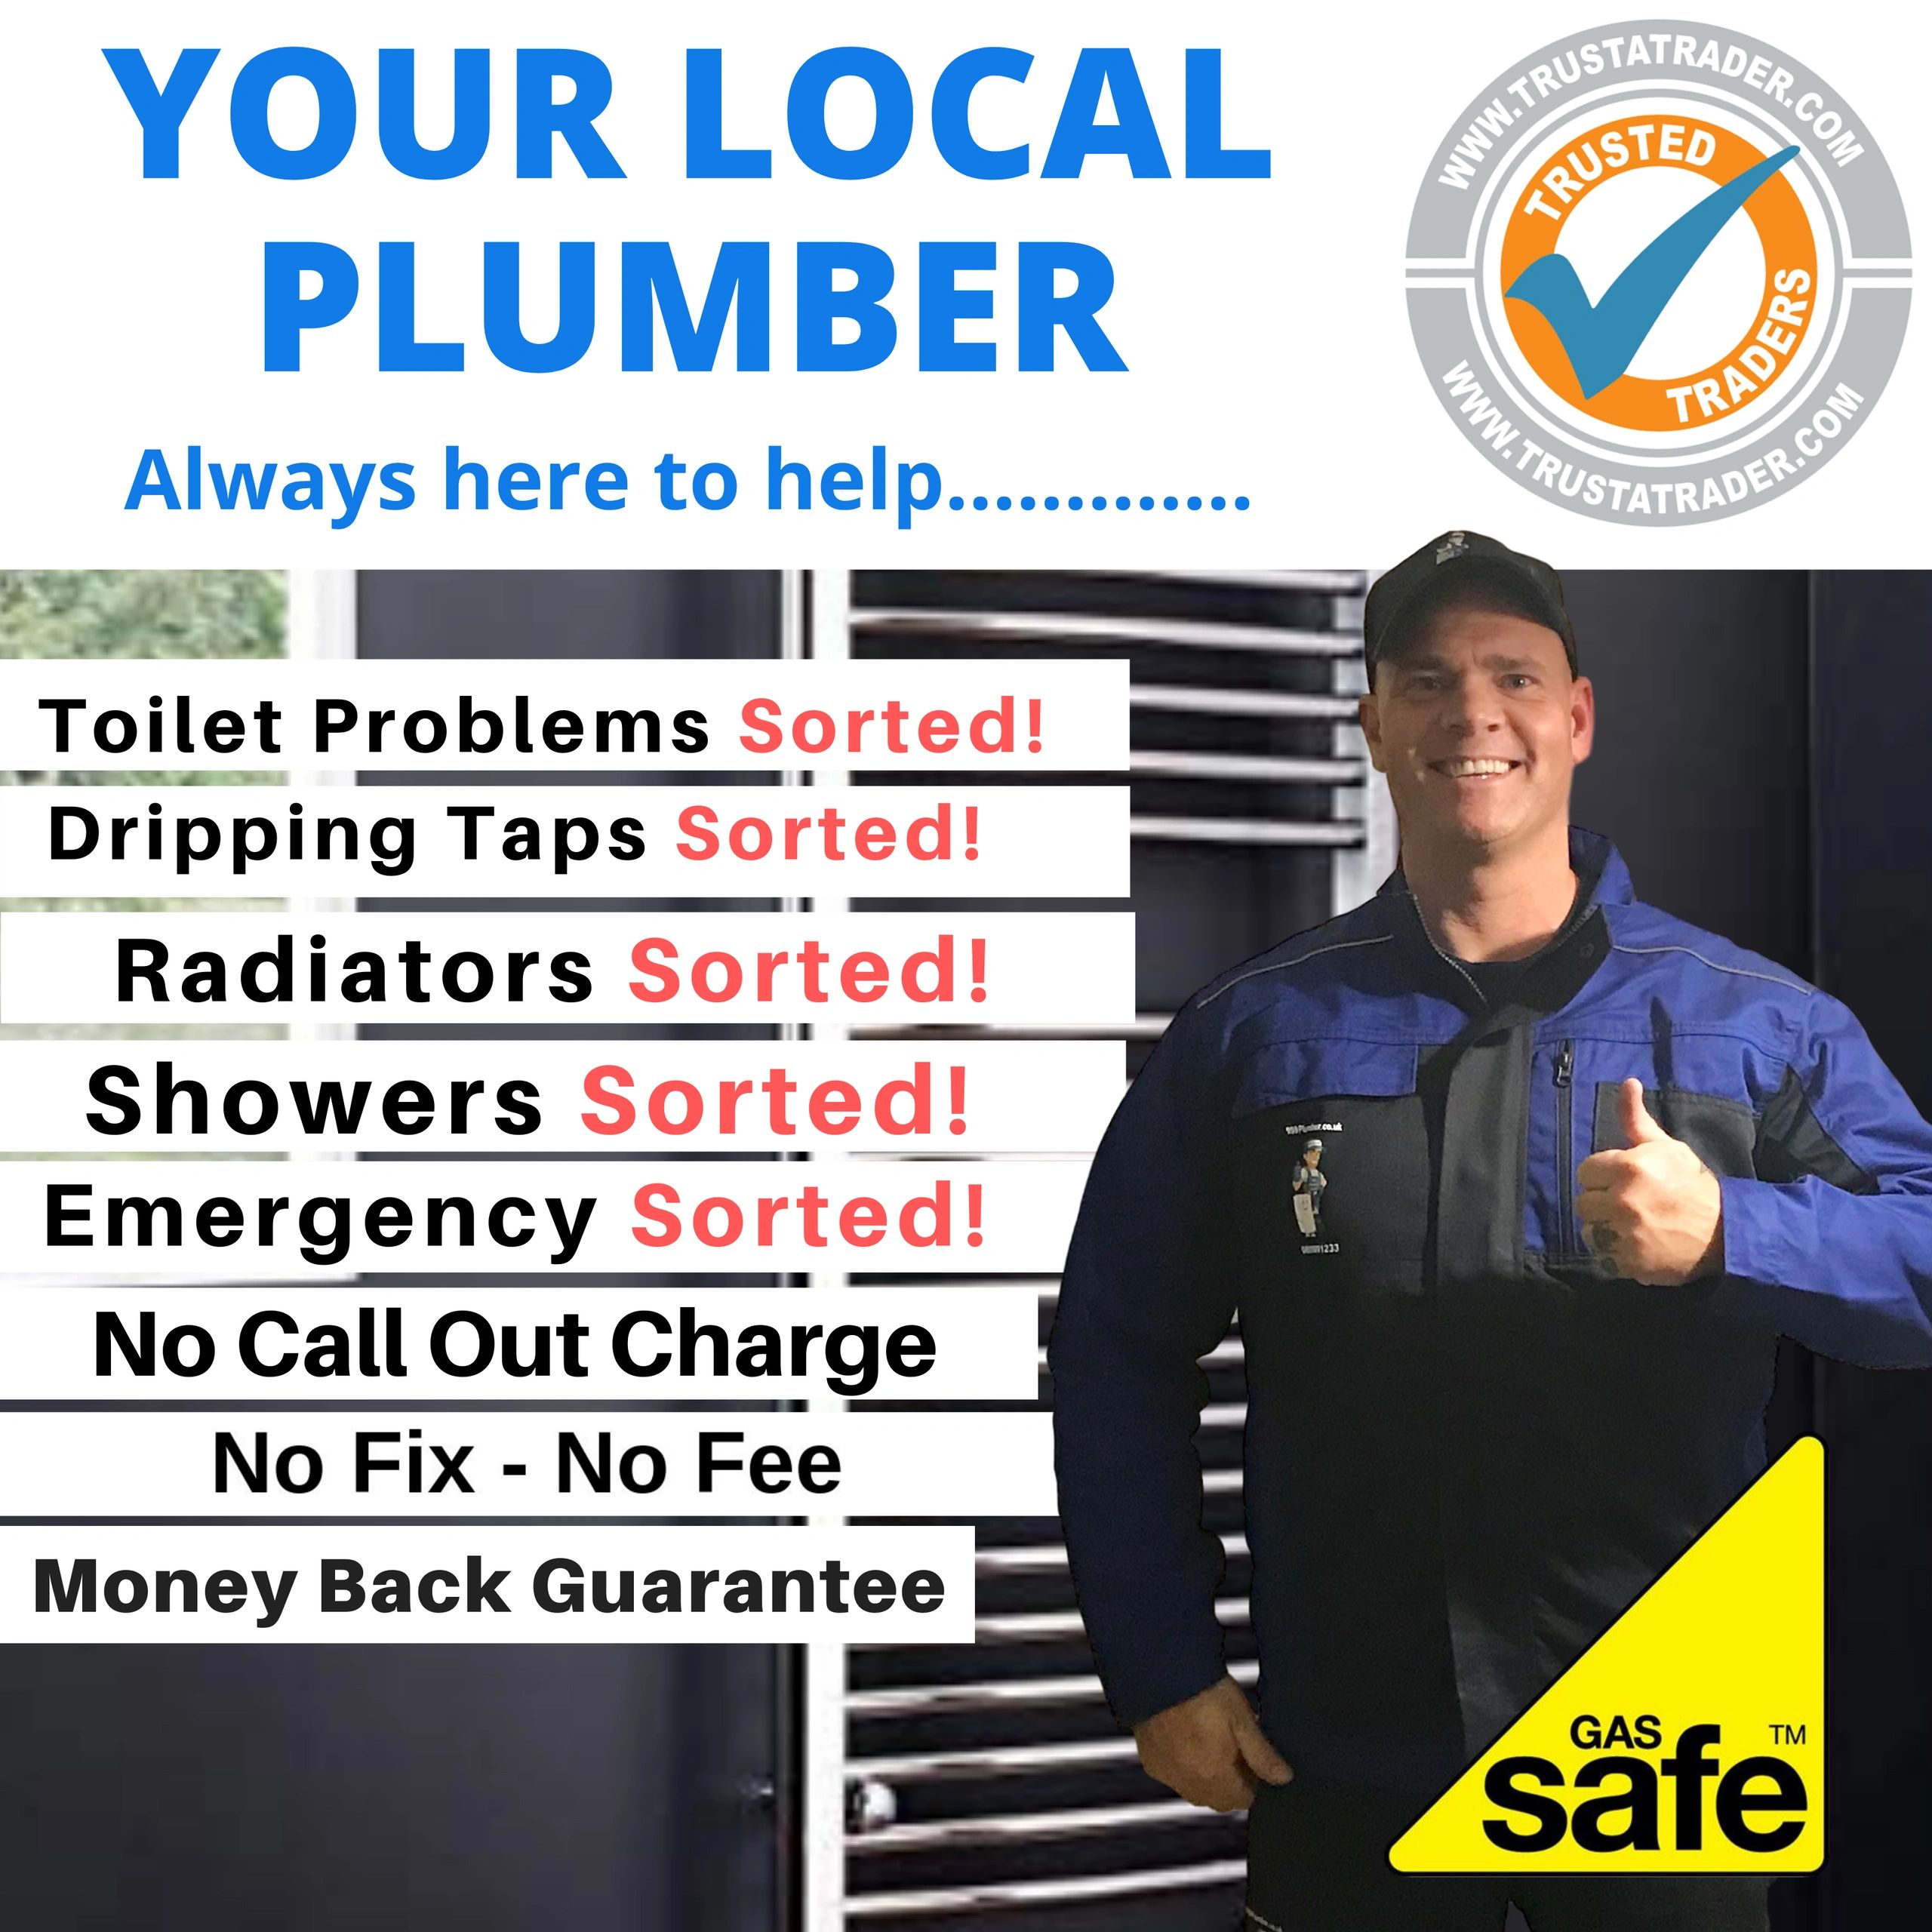 Your local plumber Letchworth city